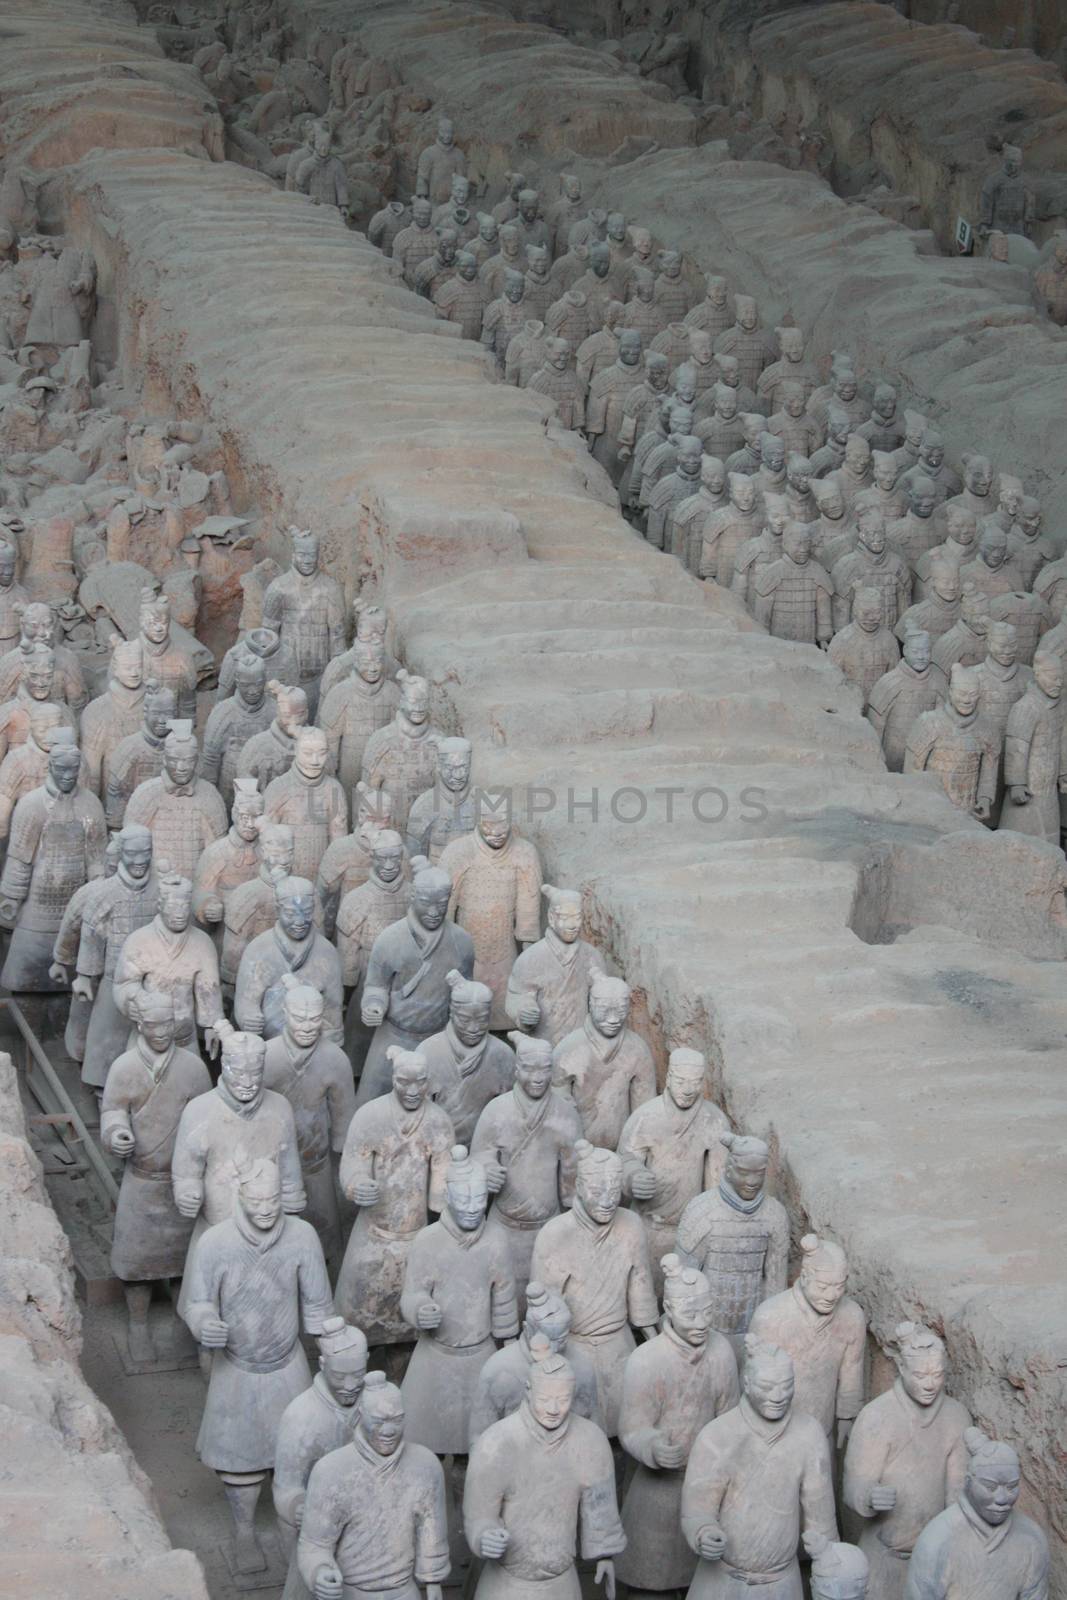 Terracotta Army, Mausoleum of the First Qin Emperor, China by vlad-m